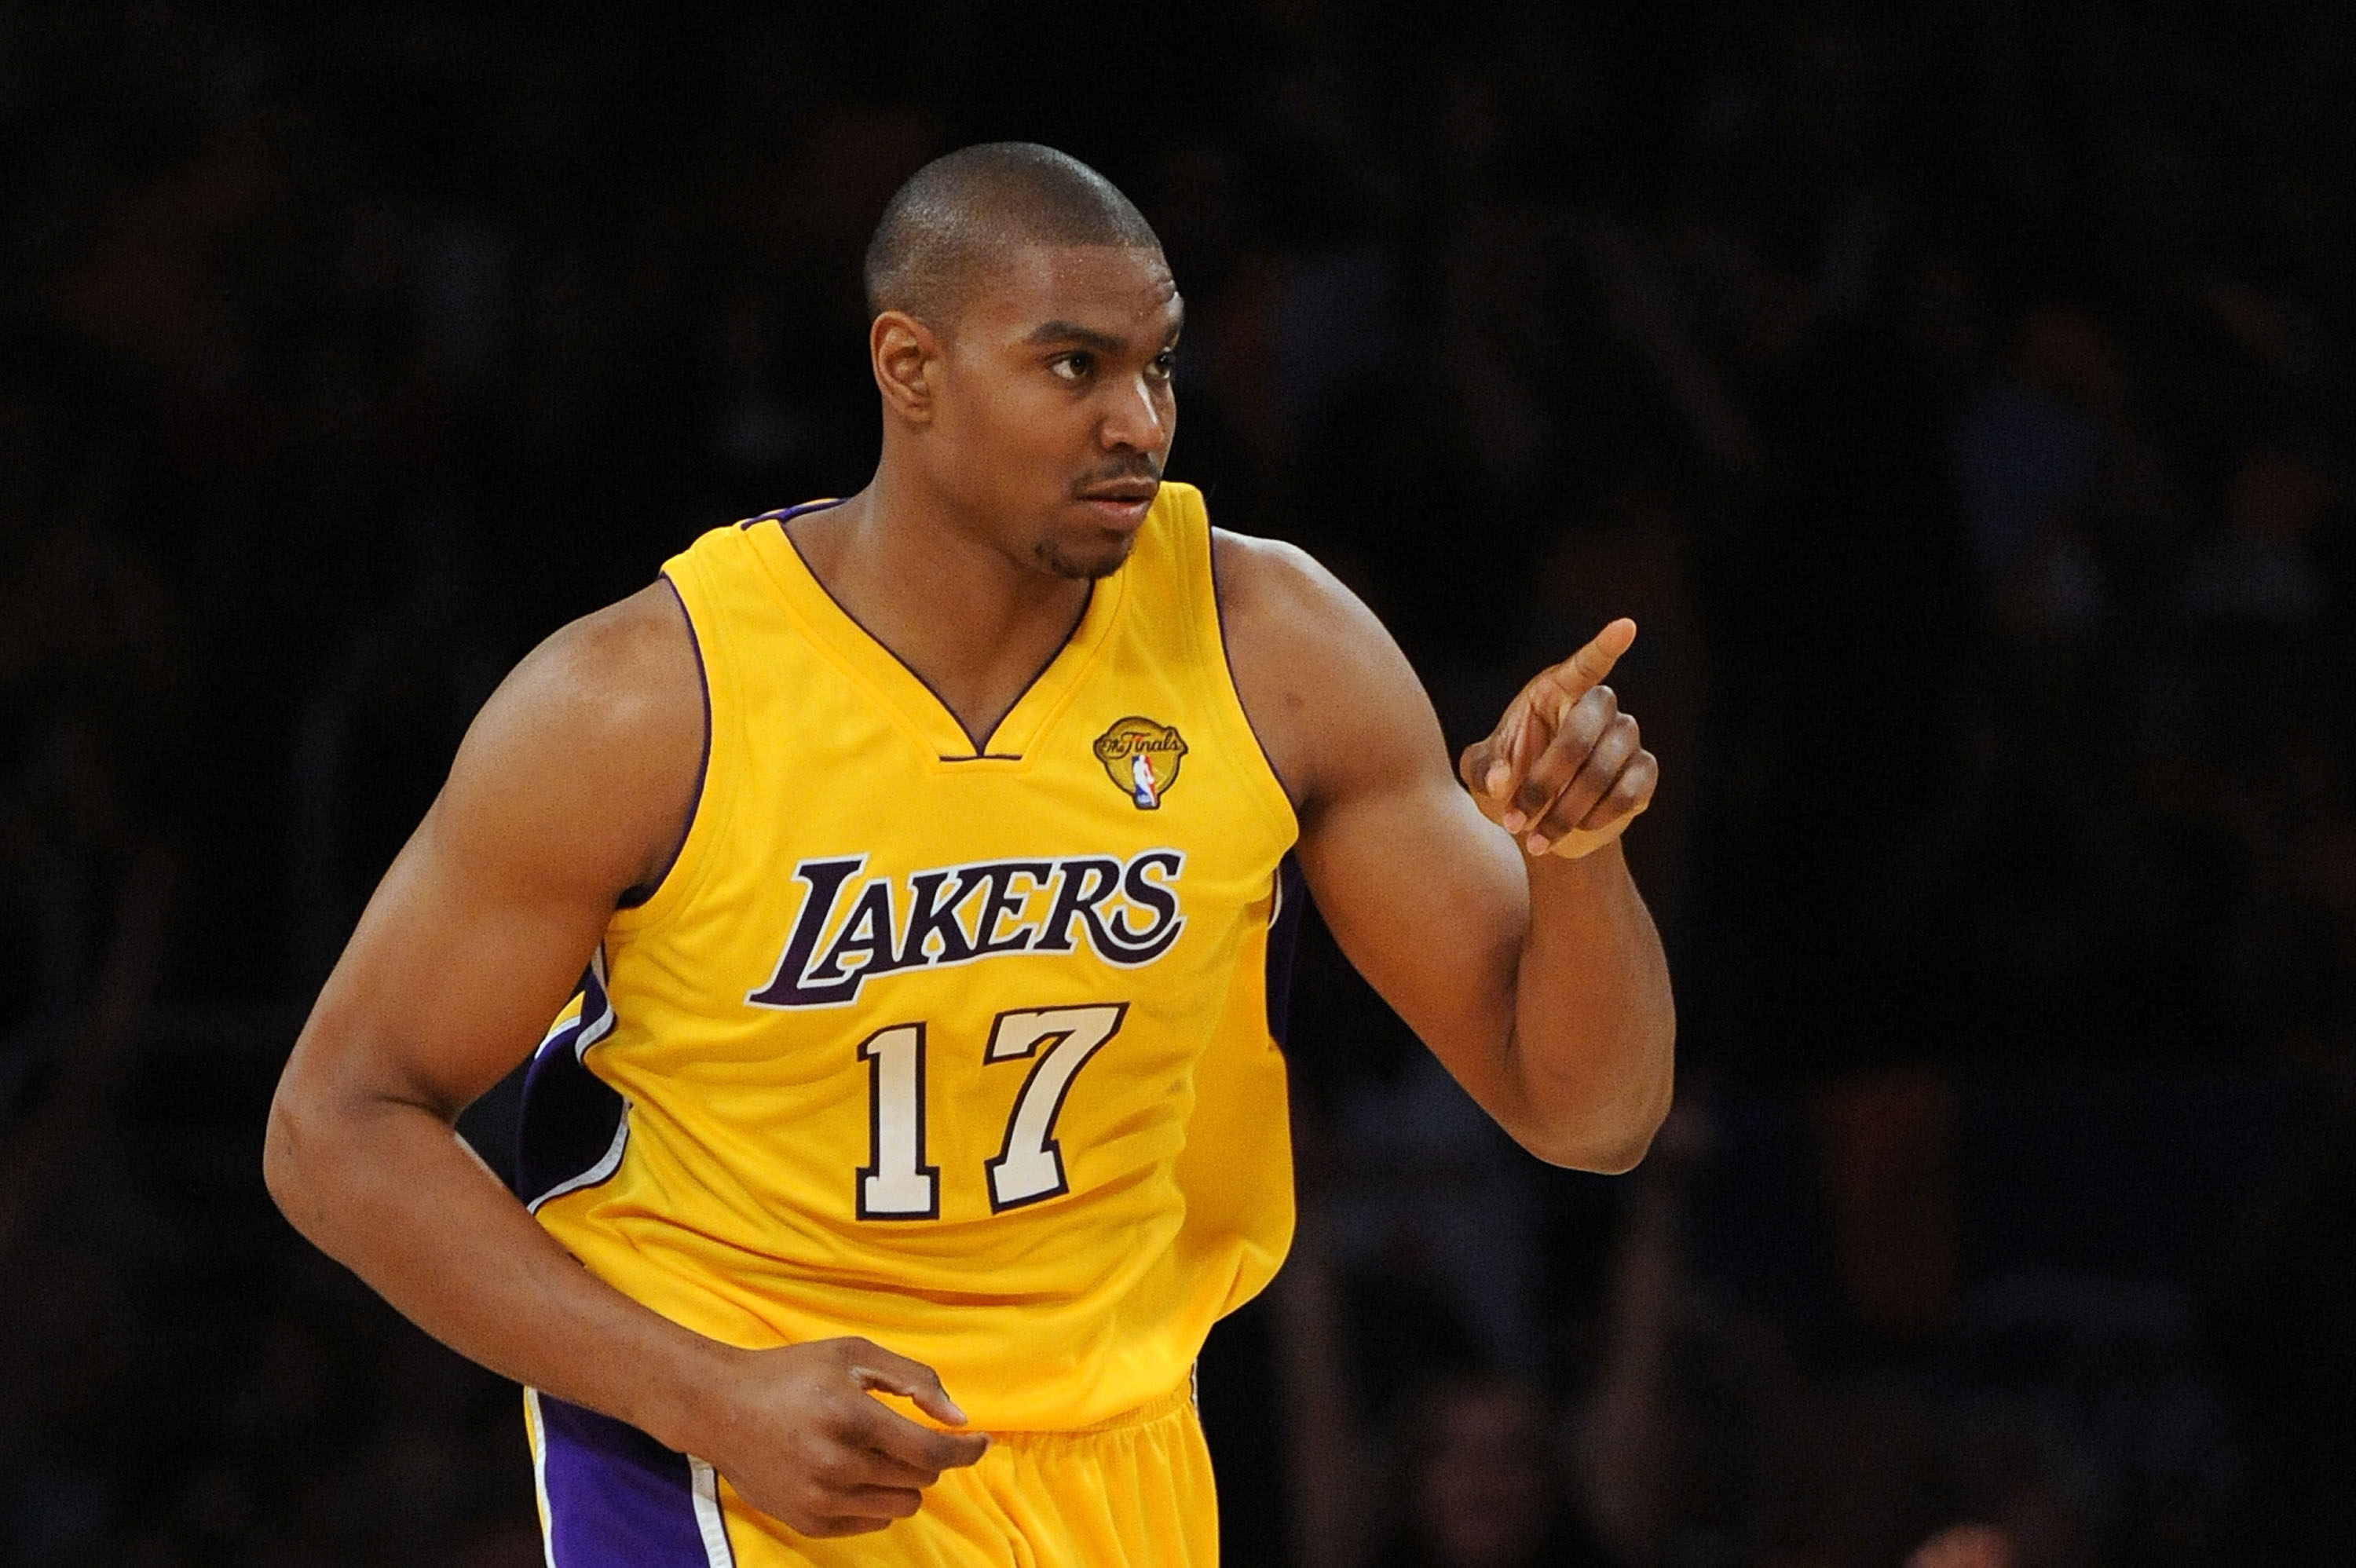 LOS ANGELES, CA - JUNE 03:  Andrew Bynum #17 of the Los Angeles Lakers reacts in the first half against the Boston Celtics in Game One of the 2010 NBA Finals at Staples Center on June 3, 2010 in Los Angeles, California.  NOTE TO USER: User expressly ackno